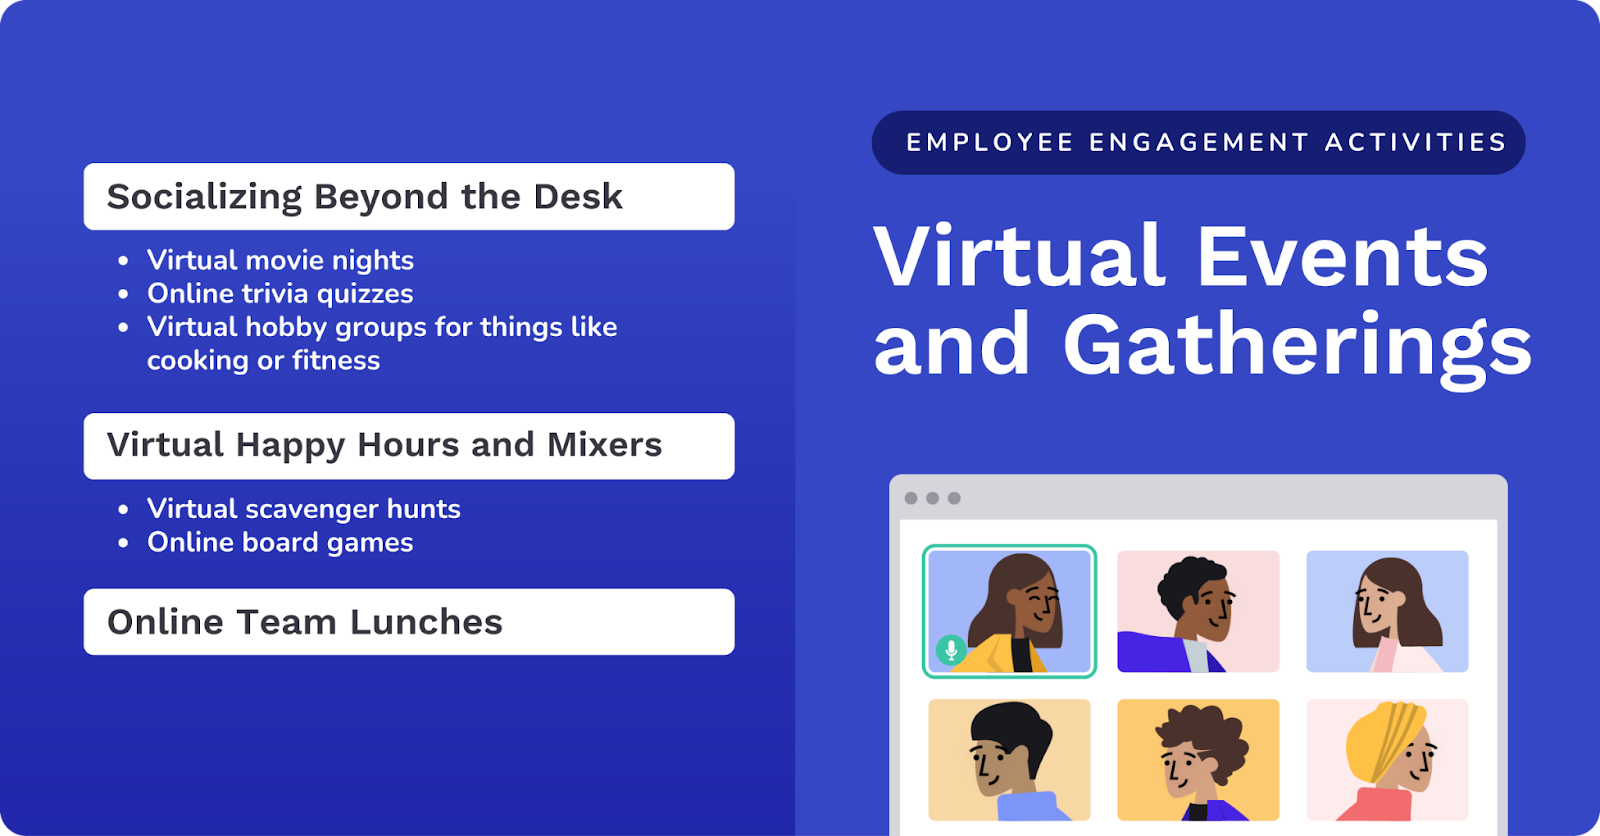 employee engagement activities: virtual gatherings and events